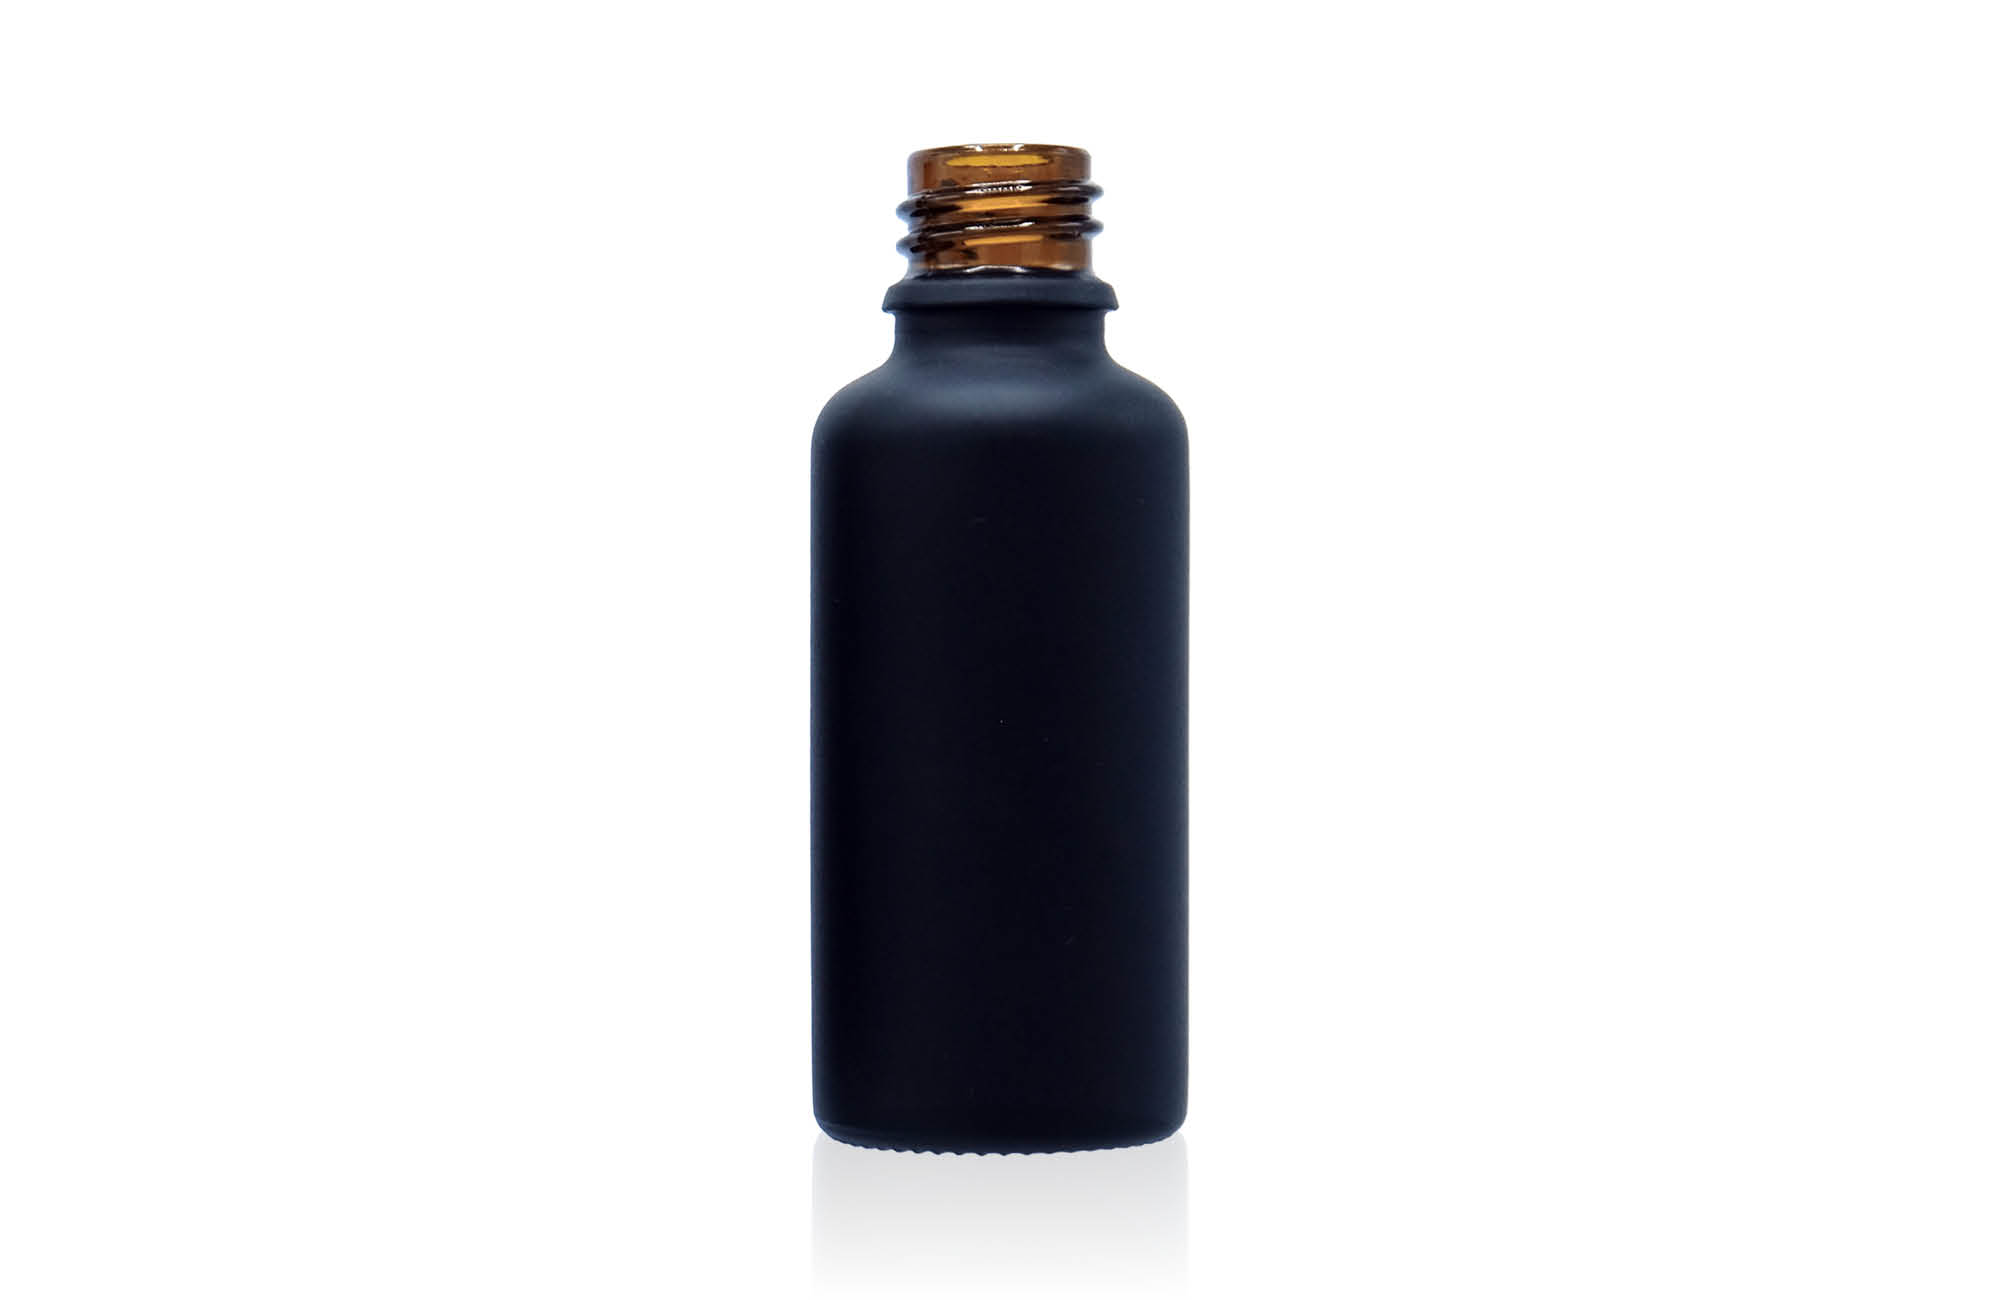 Amber dropper bottle sprayed with black colour